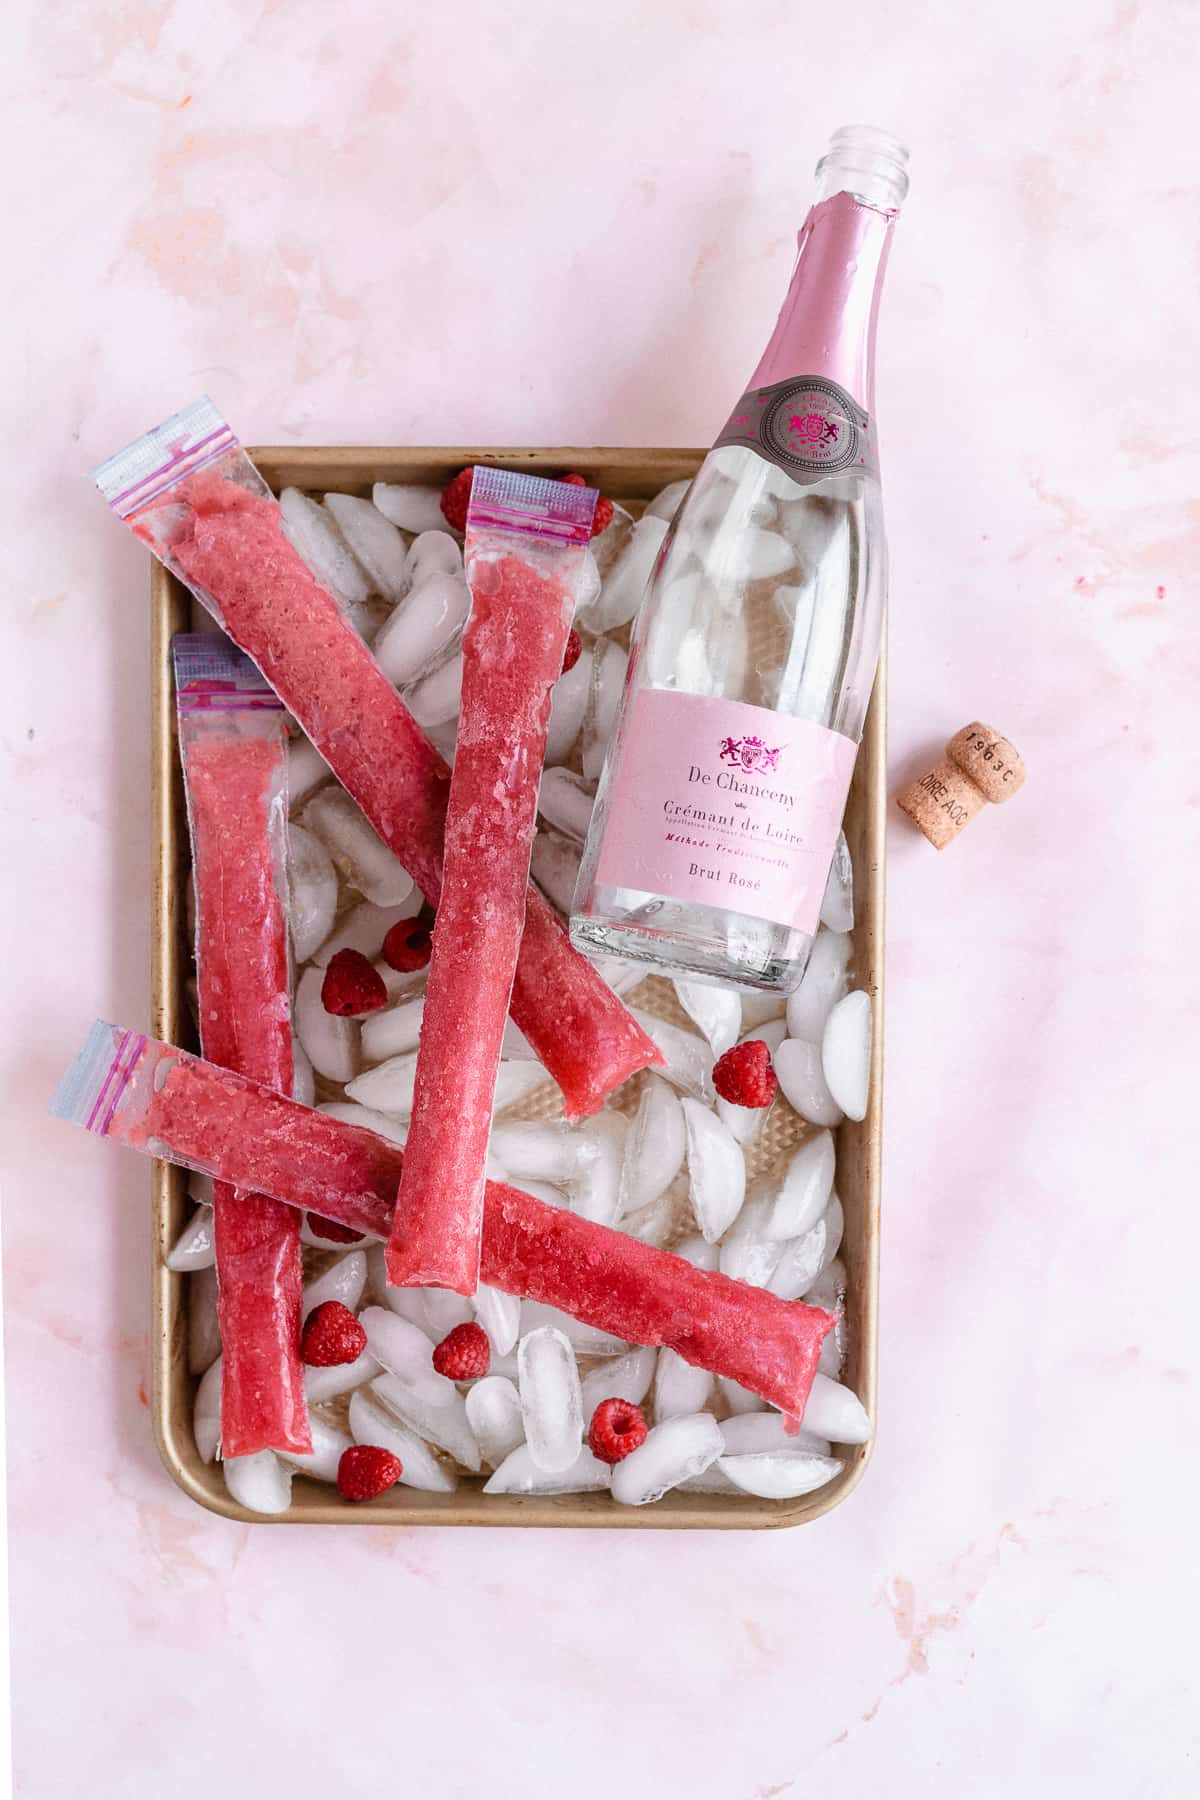 Frozen pink ice pops over ice with bottle of rose'.